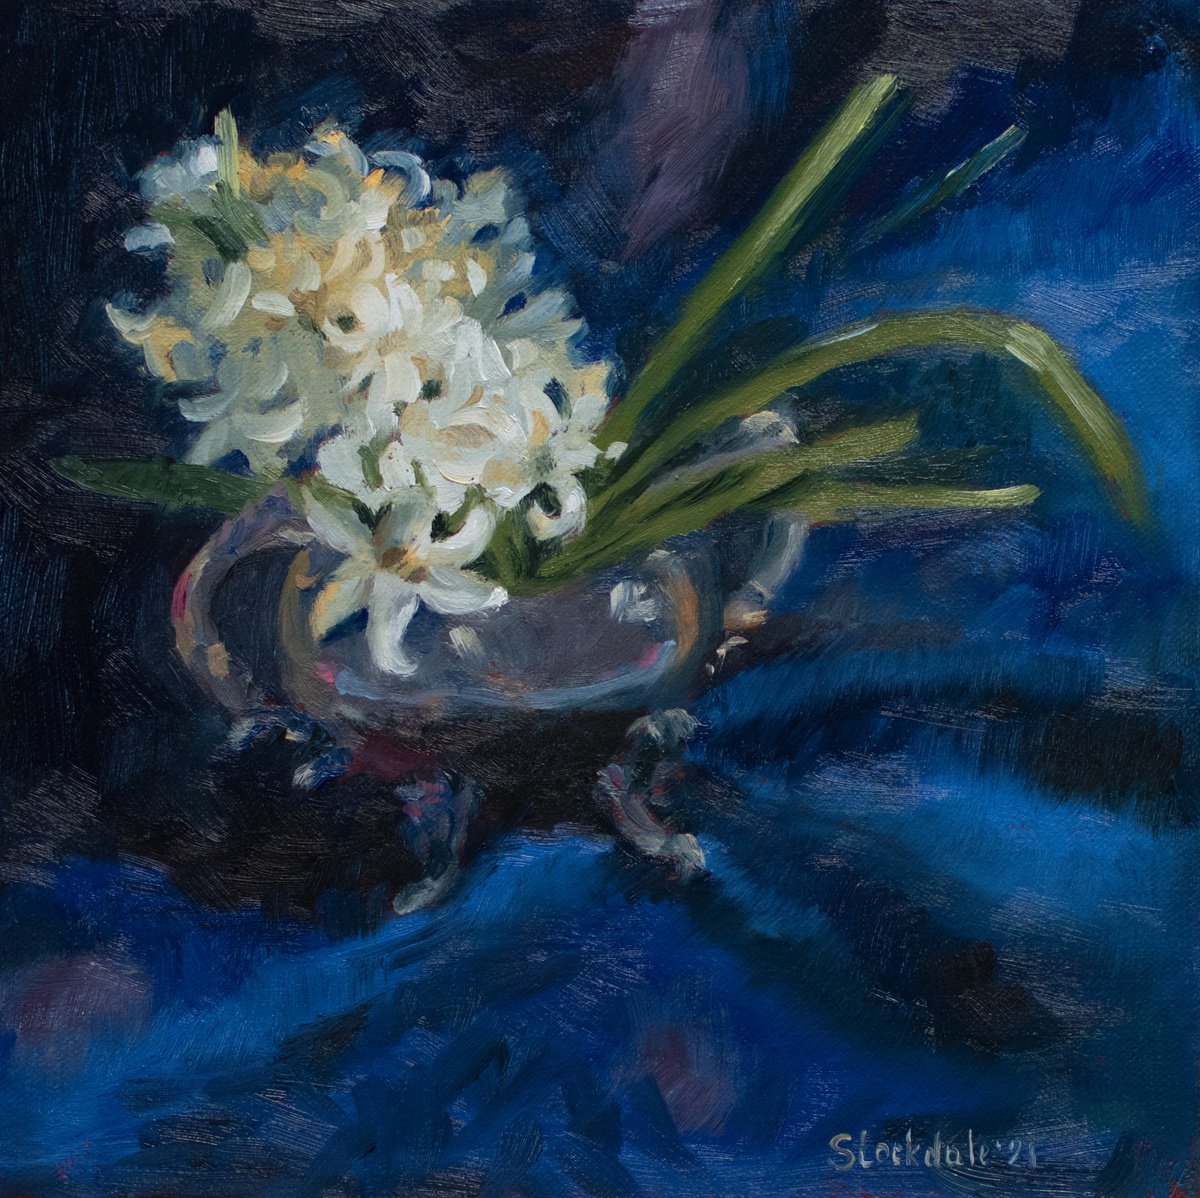 Hyacinth in a metall vase by Maria Stockdale